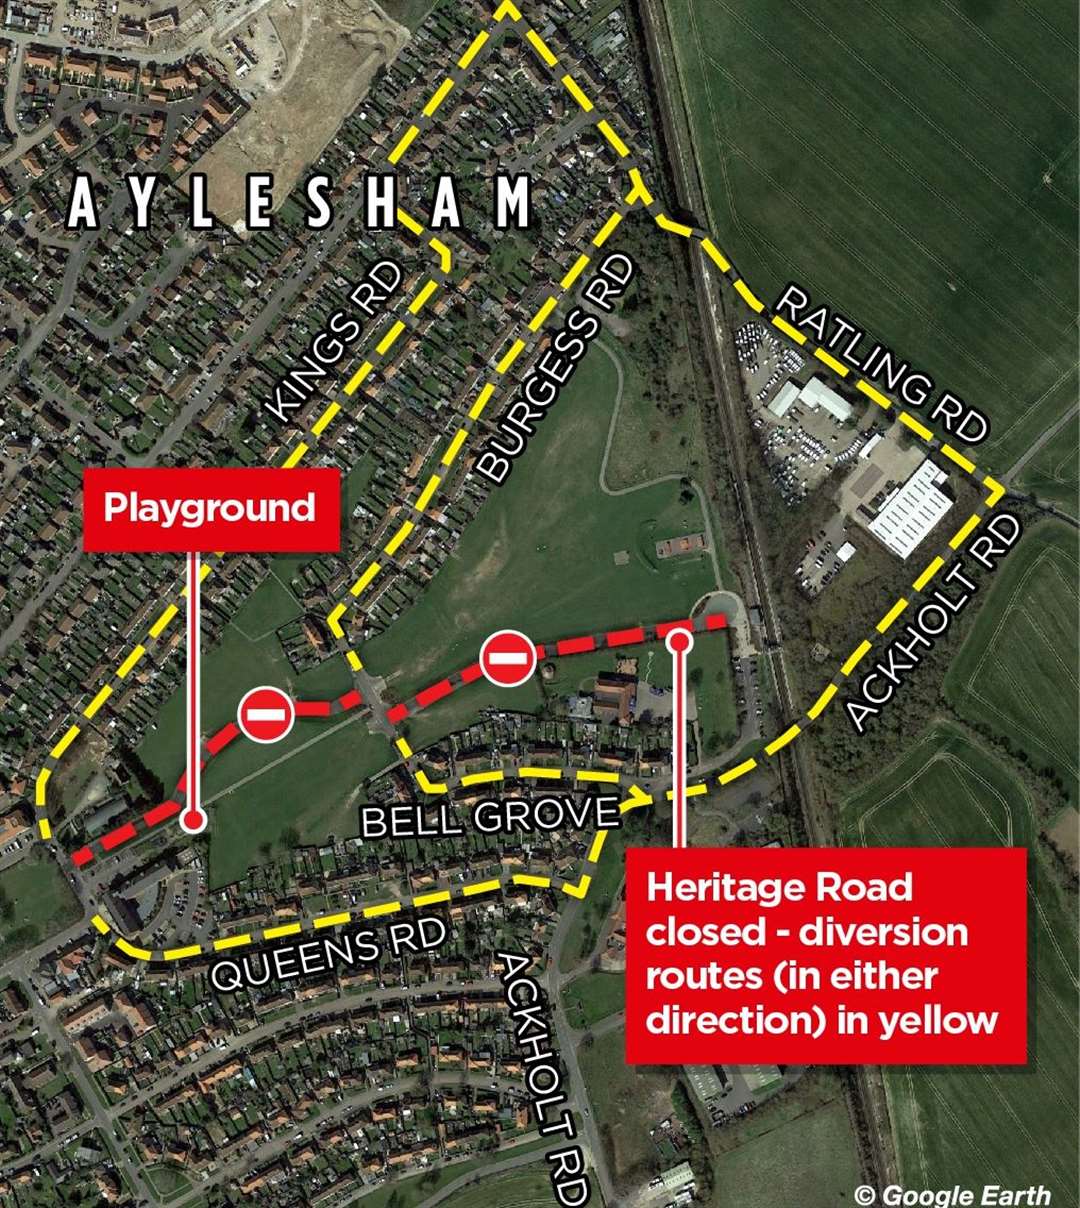 The road closure area in Aylesham. The red lines show closed roads, the yellow lines, the diversion routes. KM editorial graphic